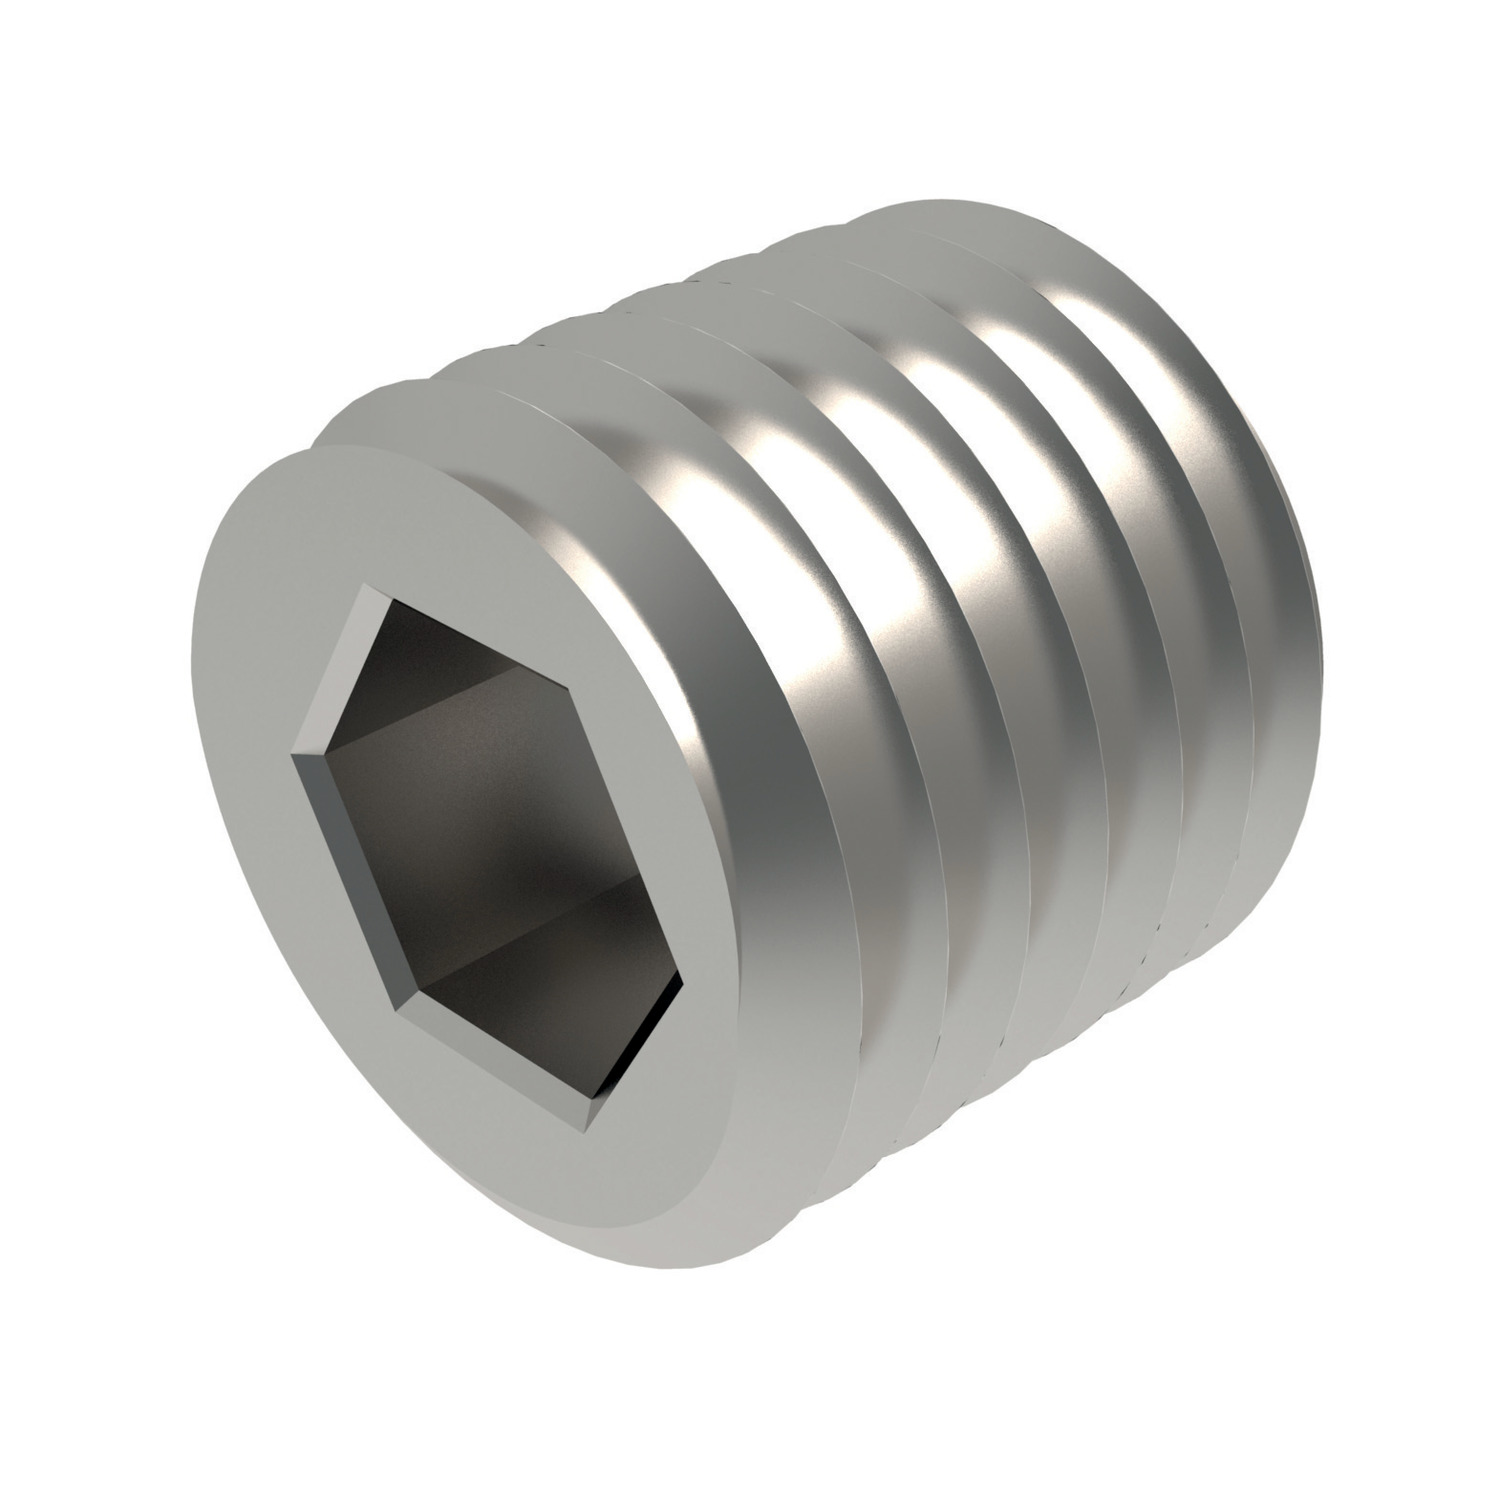 P0199.060-004-A2 Threaded Restrictor M6x1, 0.38 orifice A2 stainless steel. DANGER: Ensure this part is installed according to instructions in the product data sheet and installation notes. Holes must be completely free of oil, grease and debris.